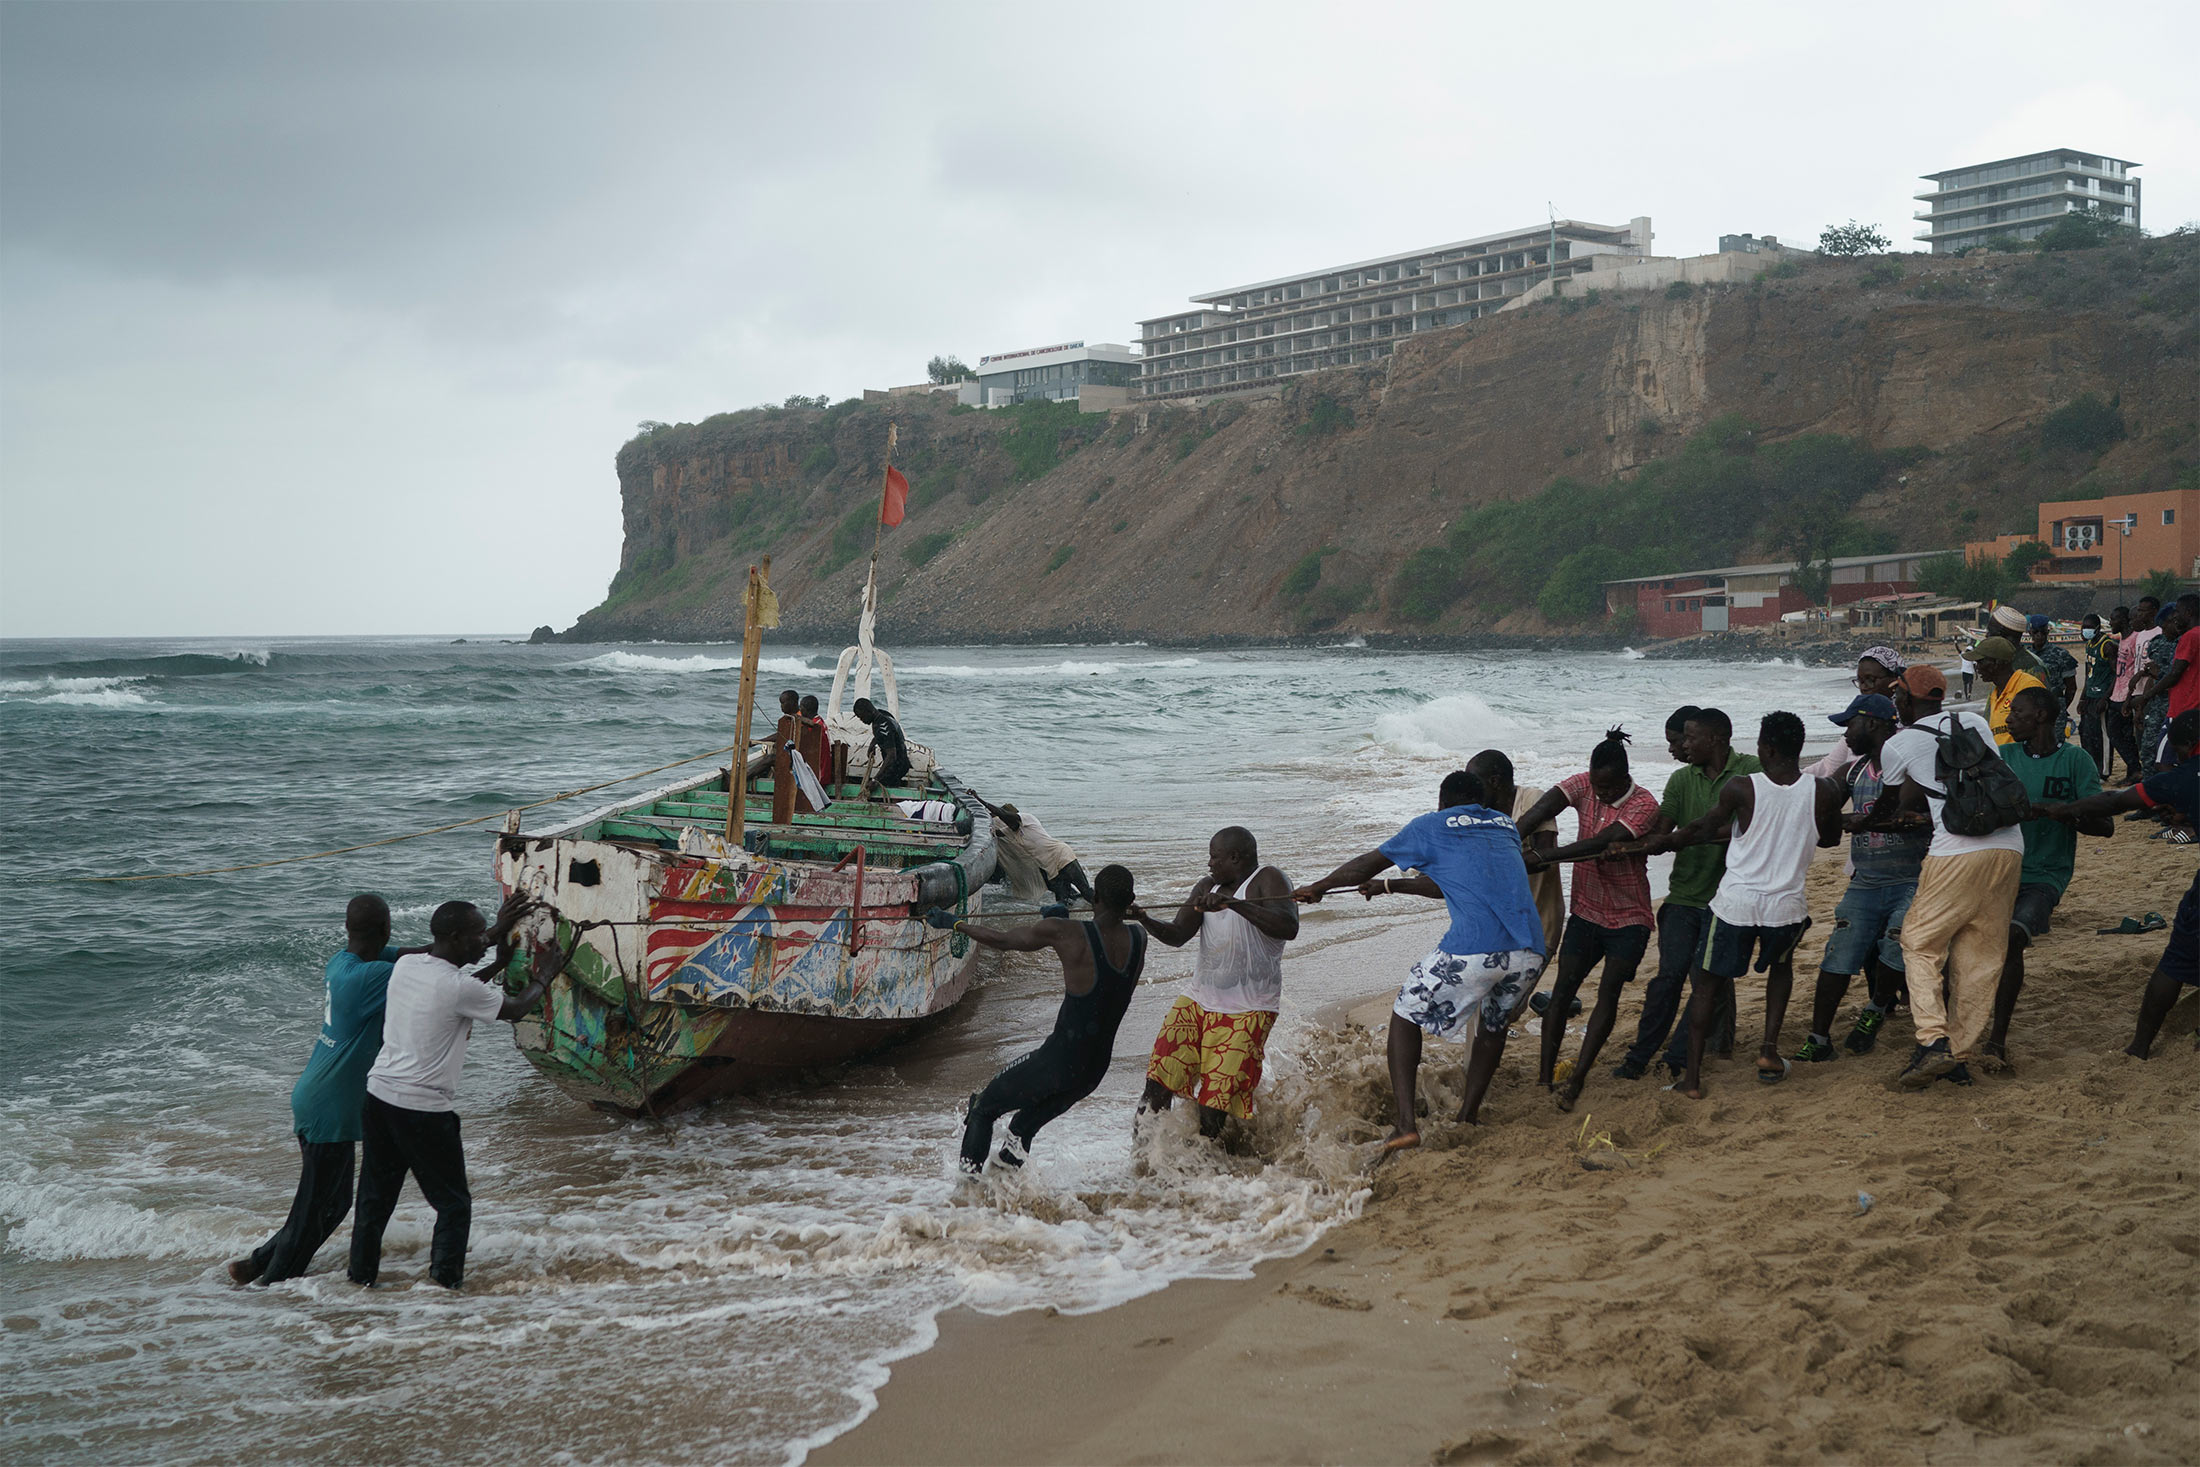 Senegal Official Says 17 Migrants Killed After Boat Capsizes - Bloomberg